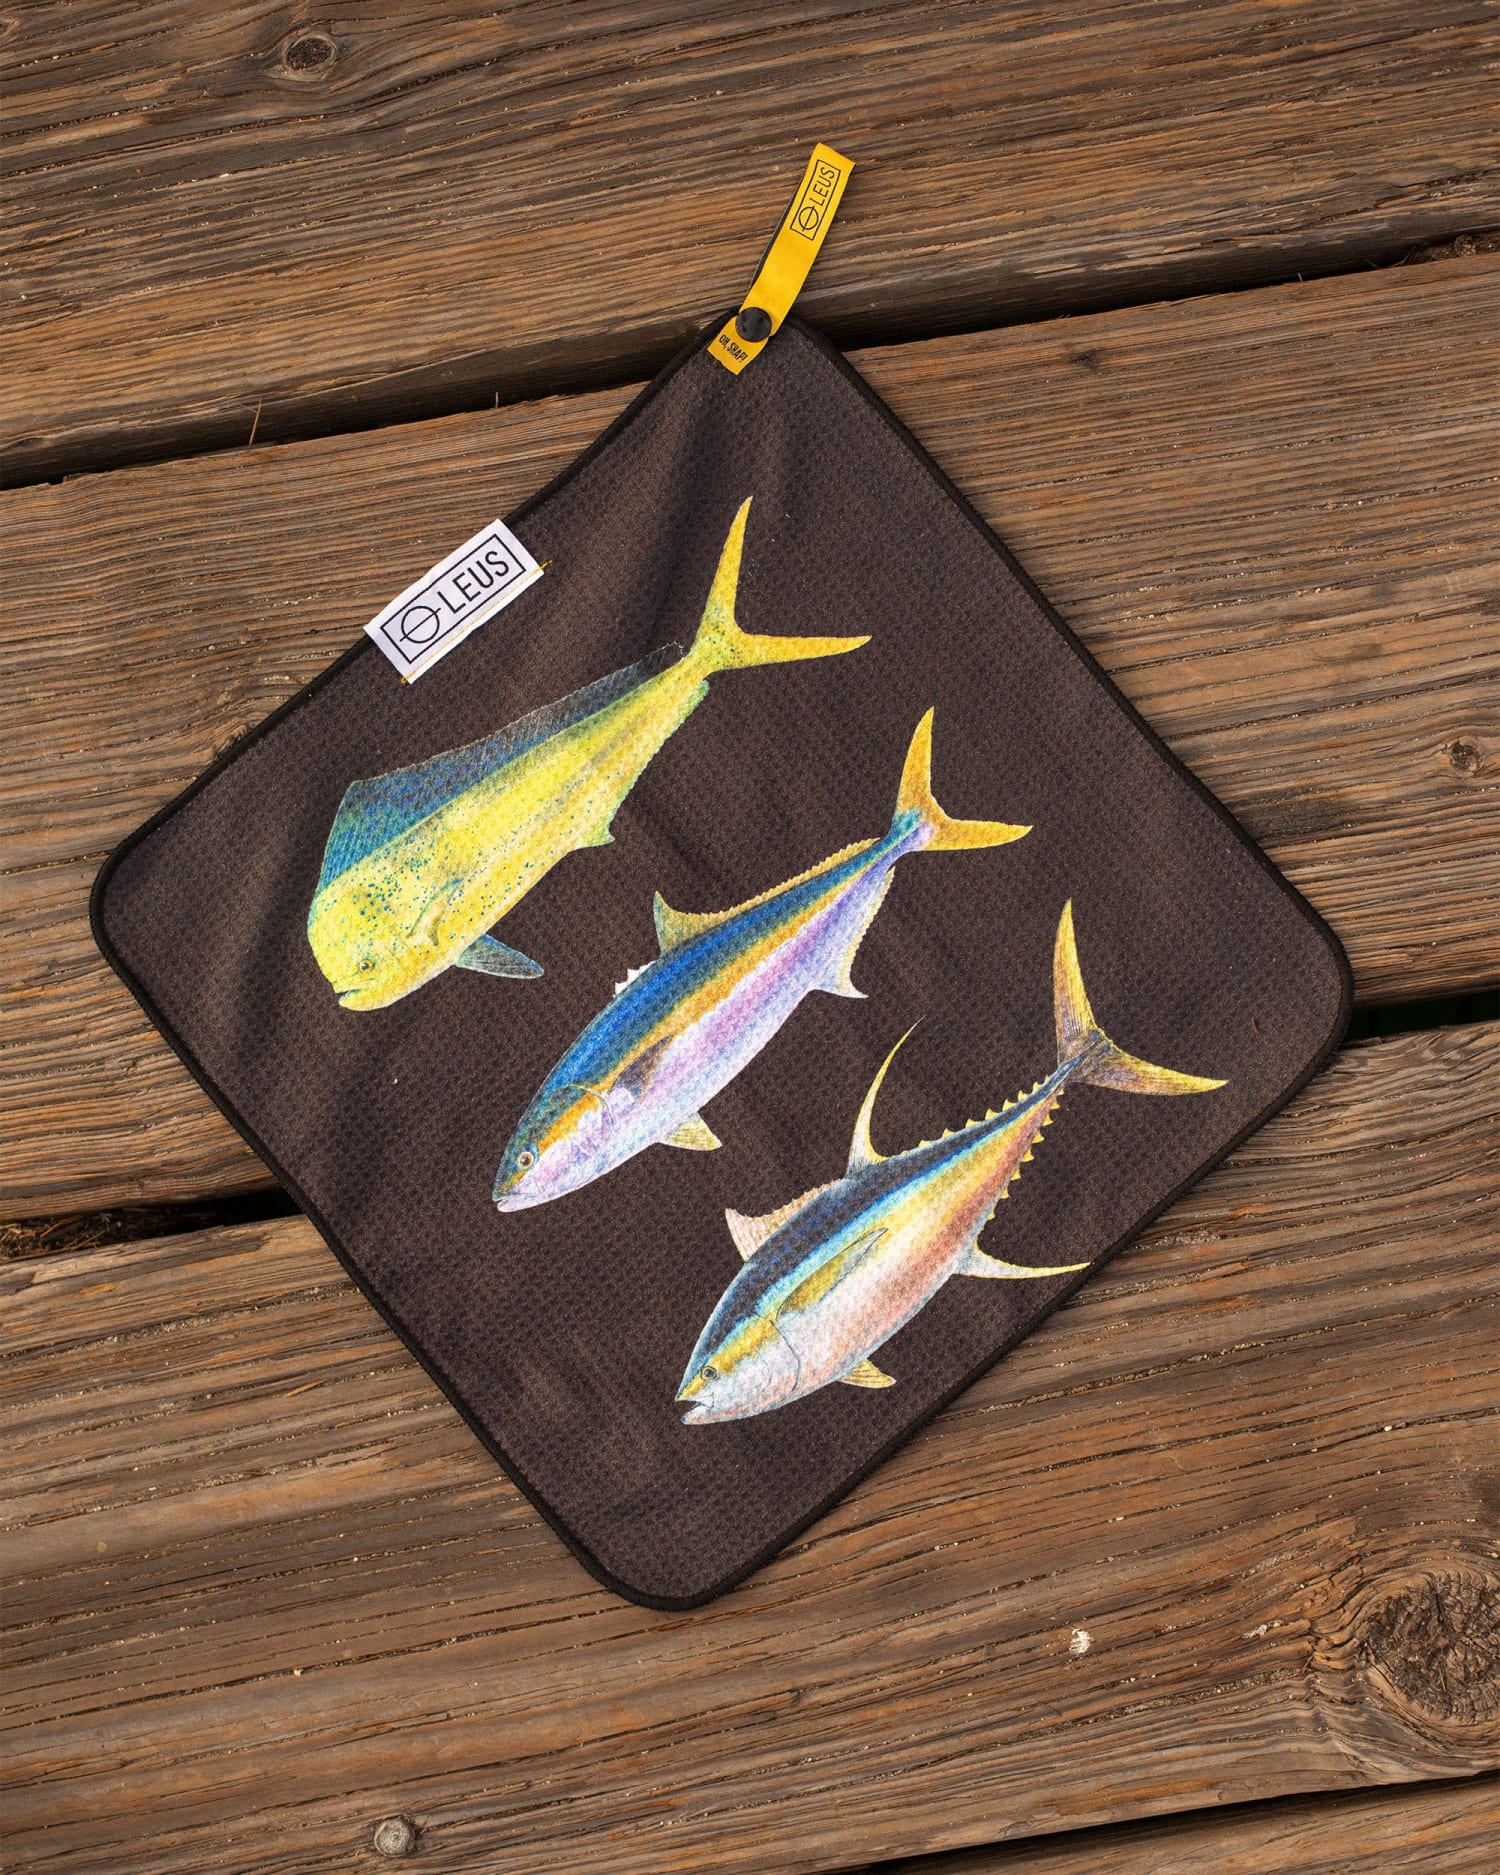 10 Best Father's Day Gifts for Saltwater Fishing from Small Businesses